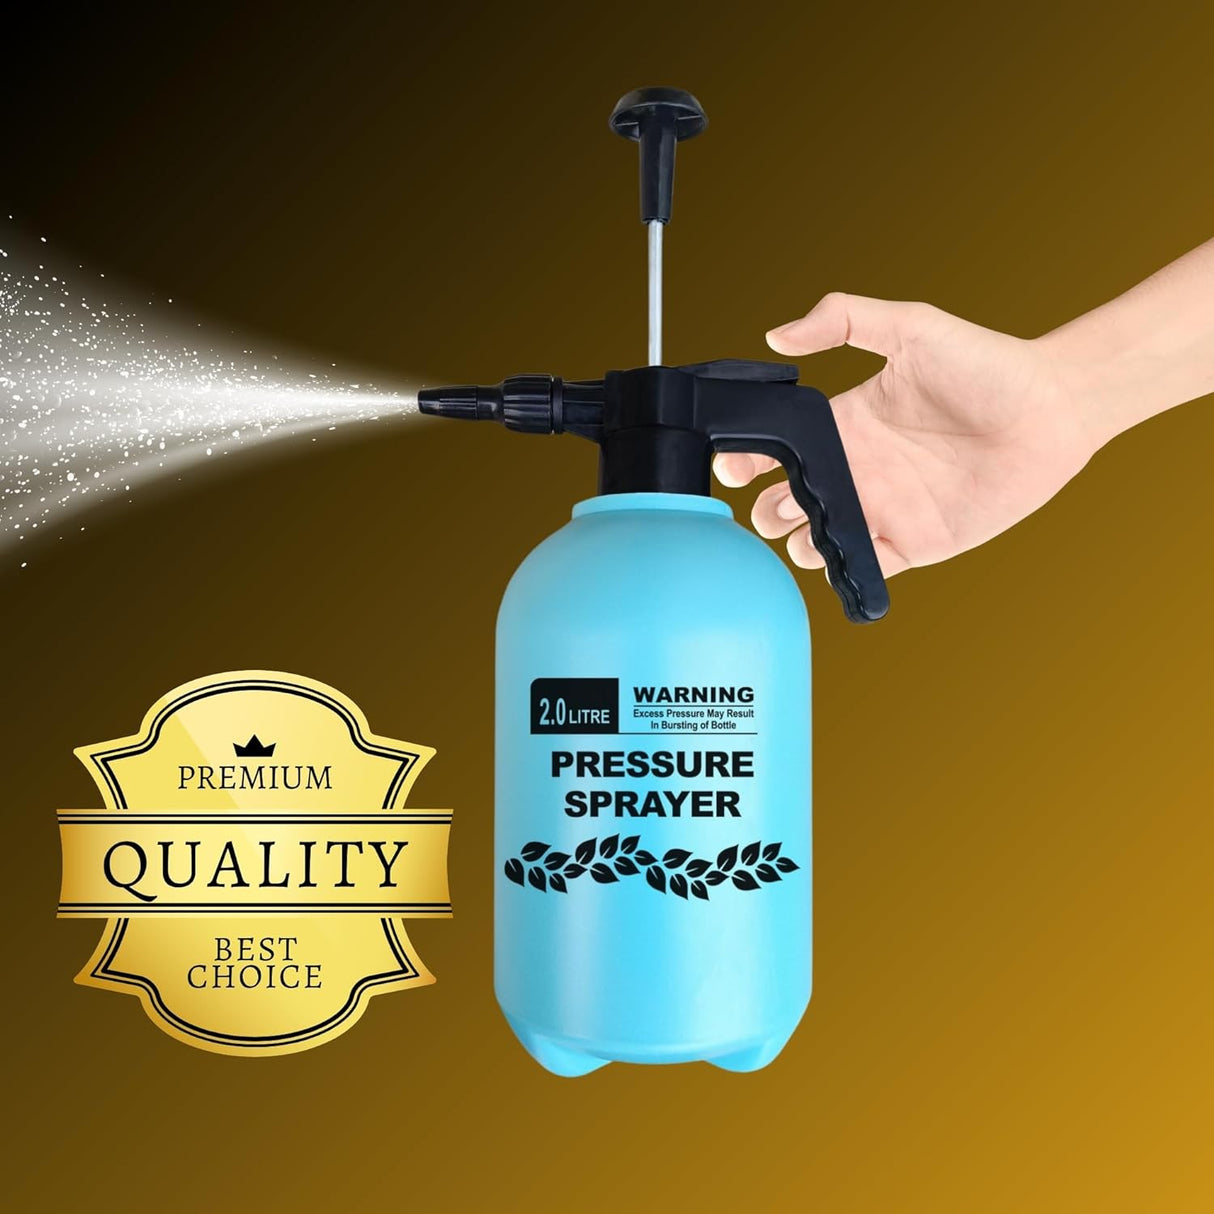 Singhal Pressure Spray Pump (2L) | Gardening Water Pump Sprayer | Plant Water Sprayer for Home Garden | Spray Bottles for Garden Plants and Lawn - Pack of 2